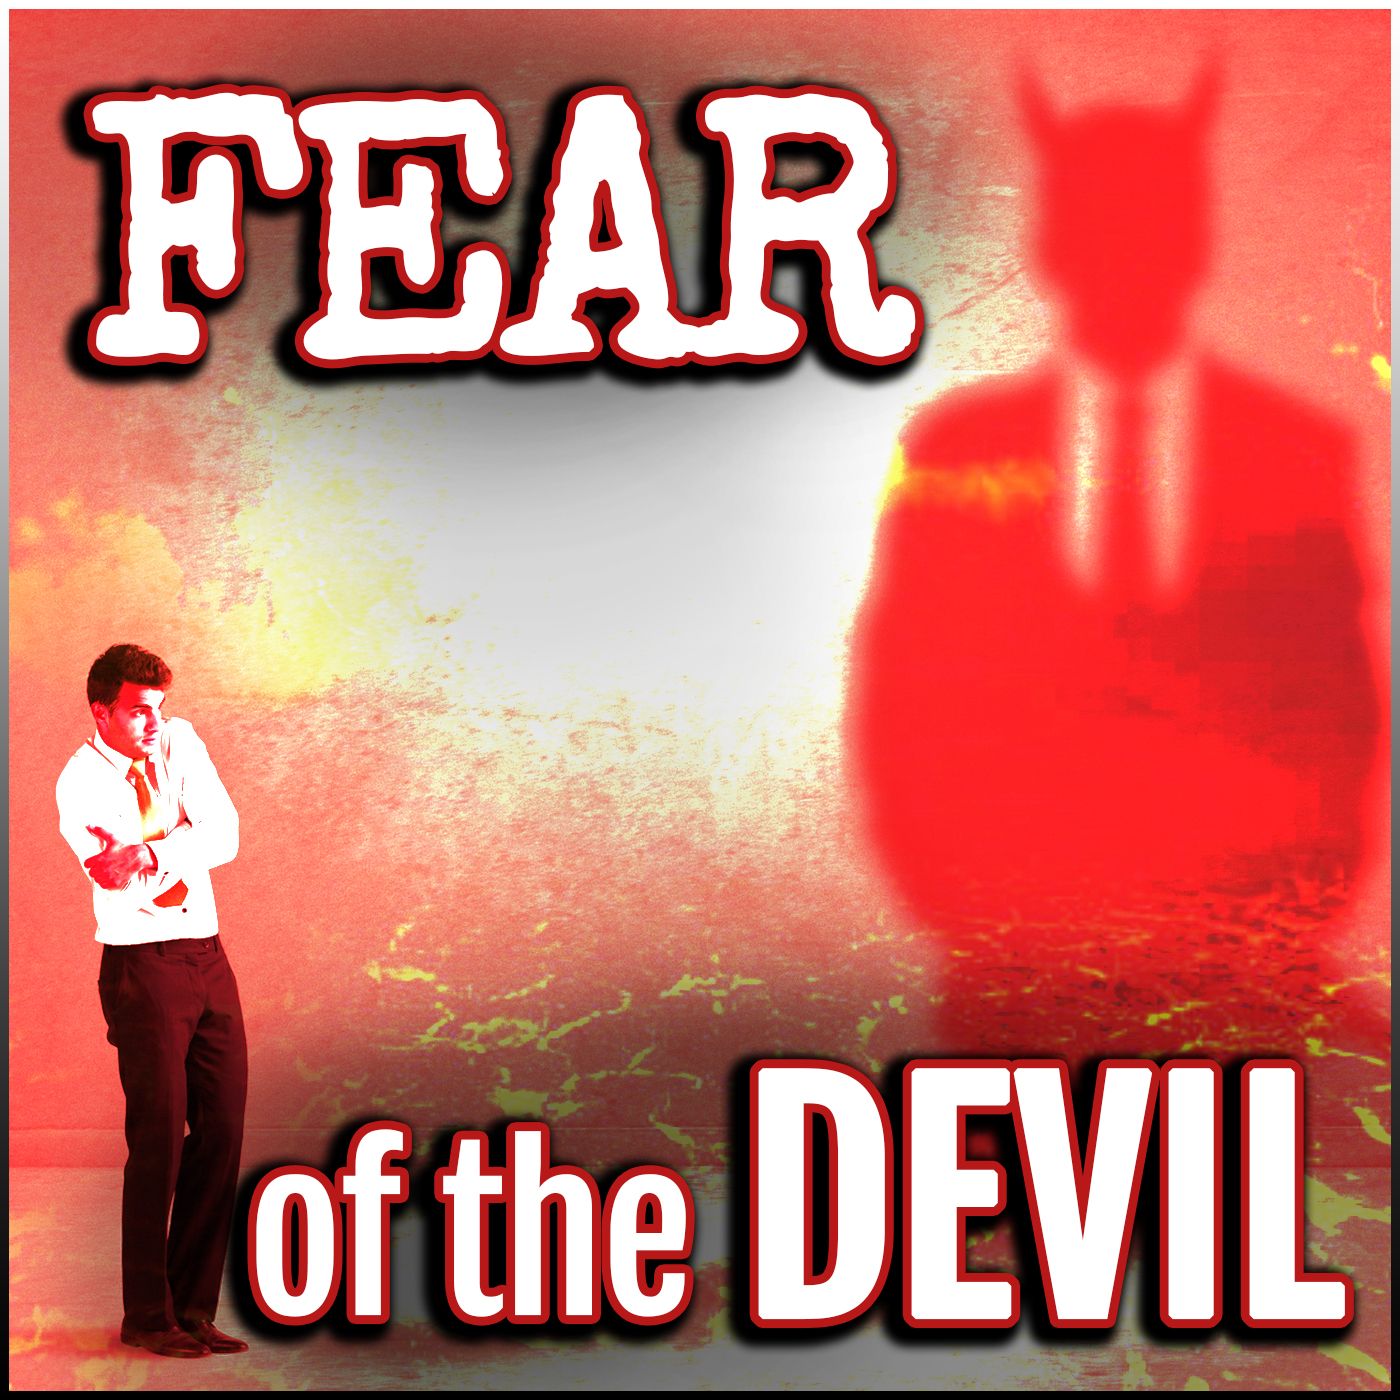 Fear of the Devil: Paranoia and Panic by the ”Divinely Protected”